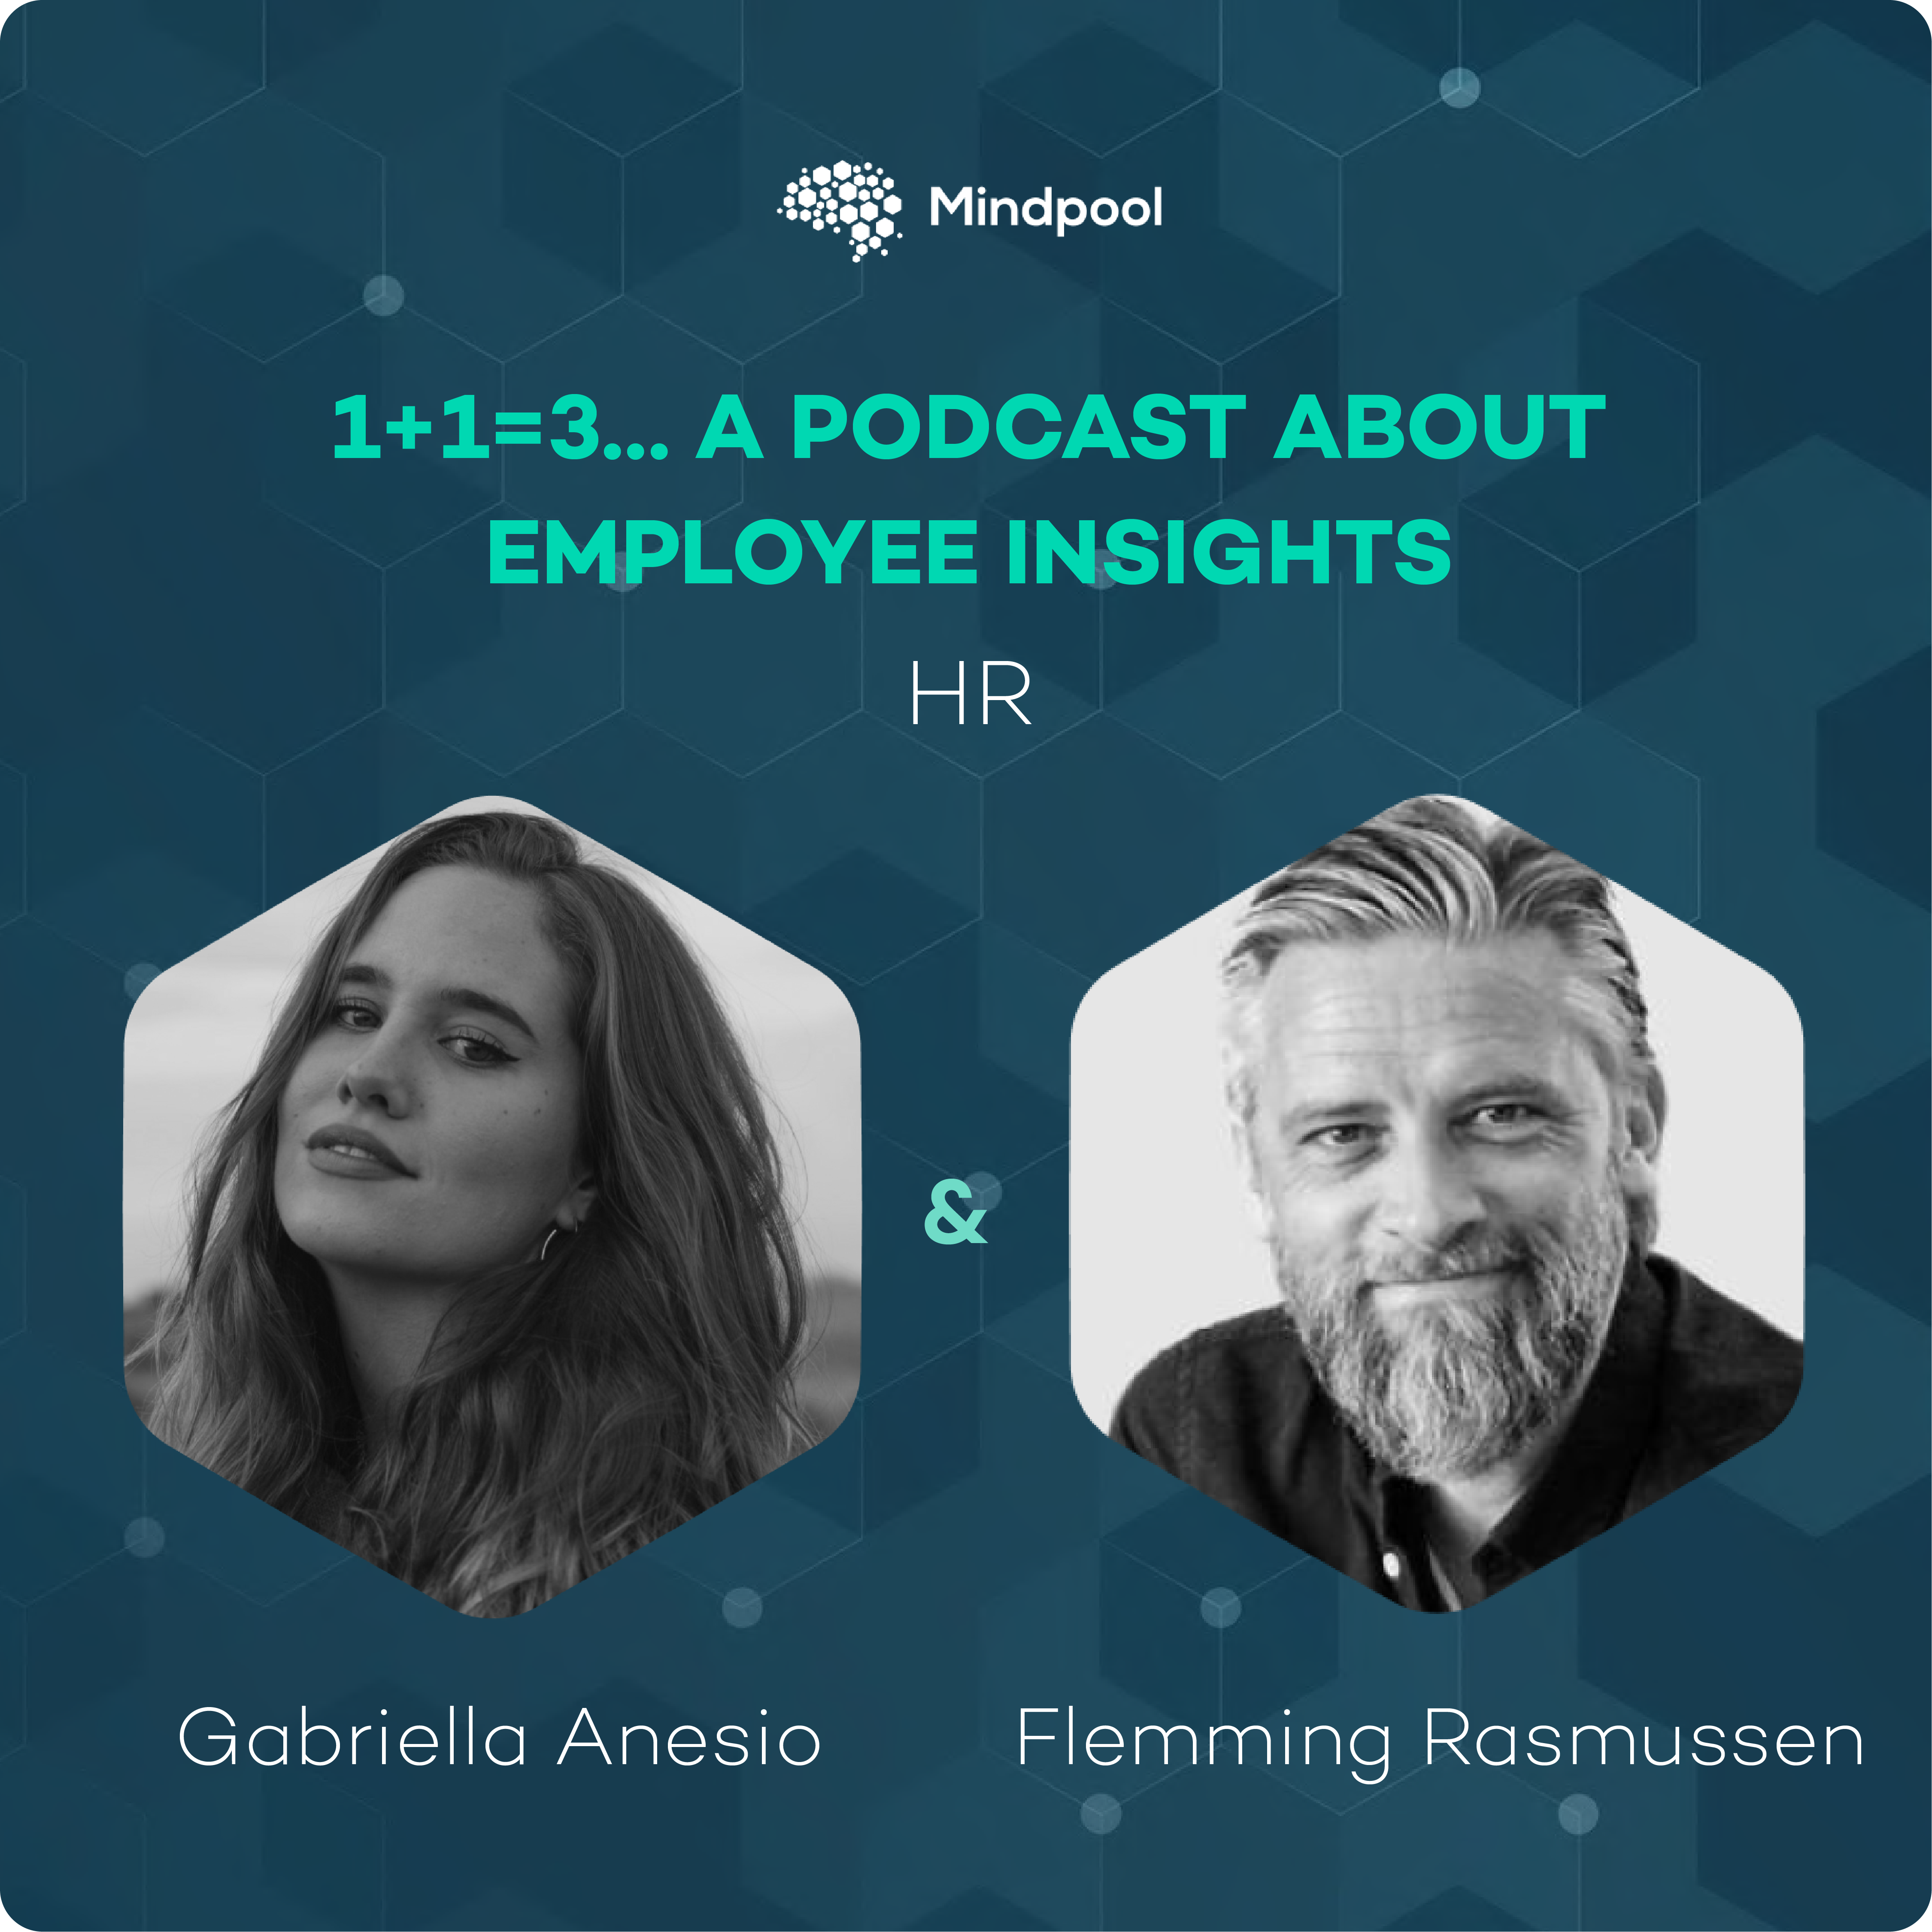 <p>1+1=3: A podcast about employee insights #4</p>